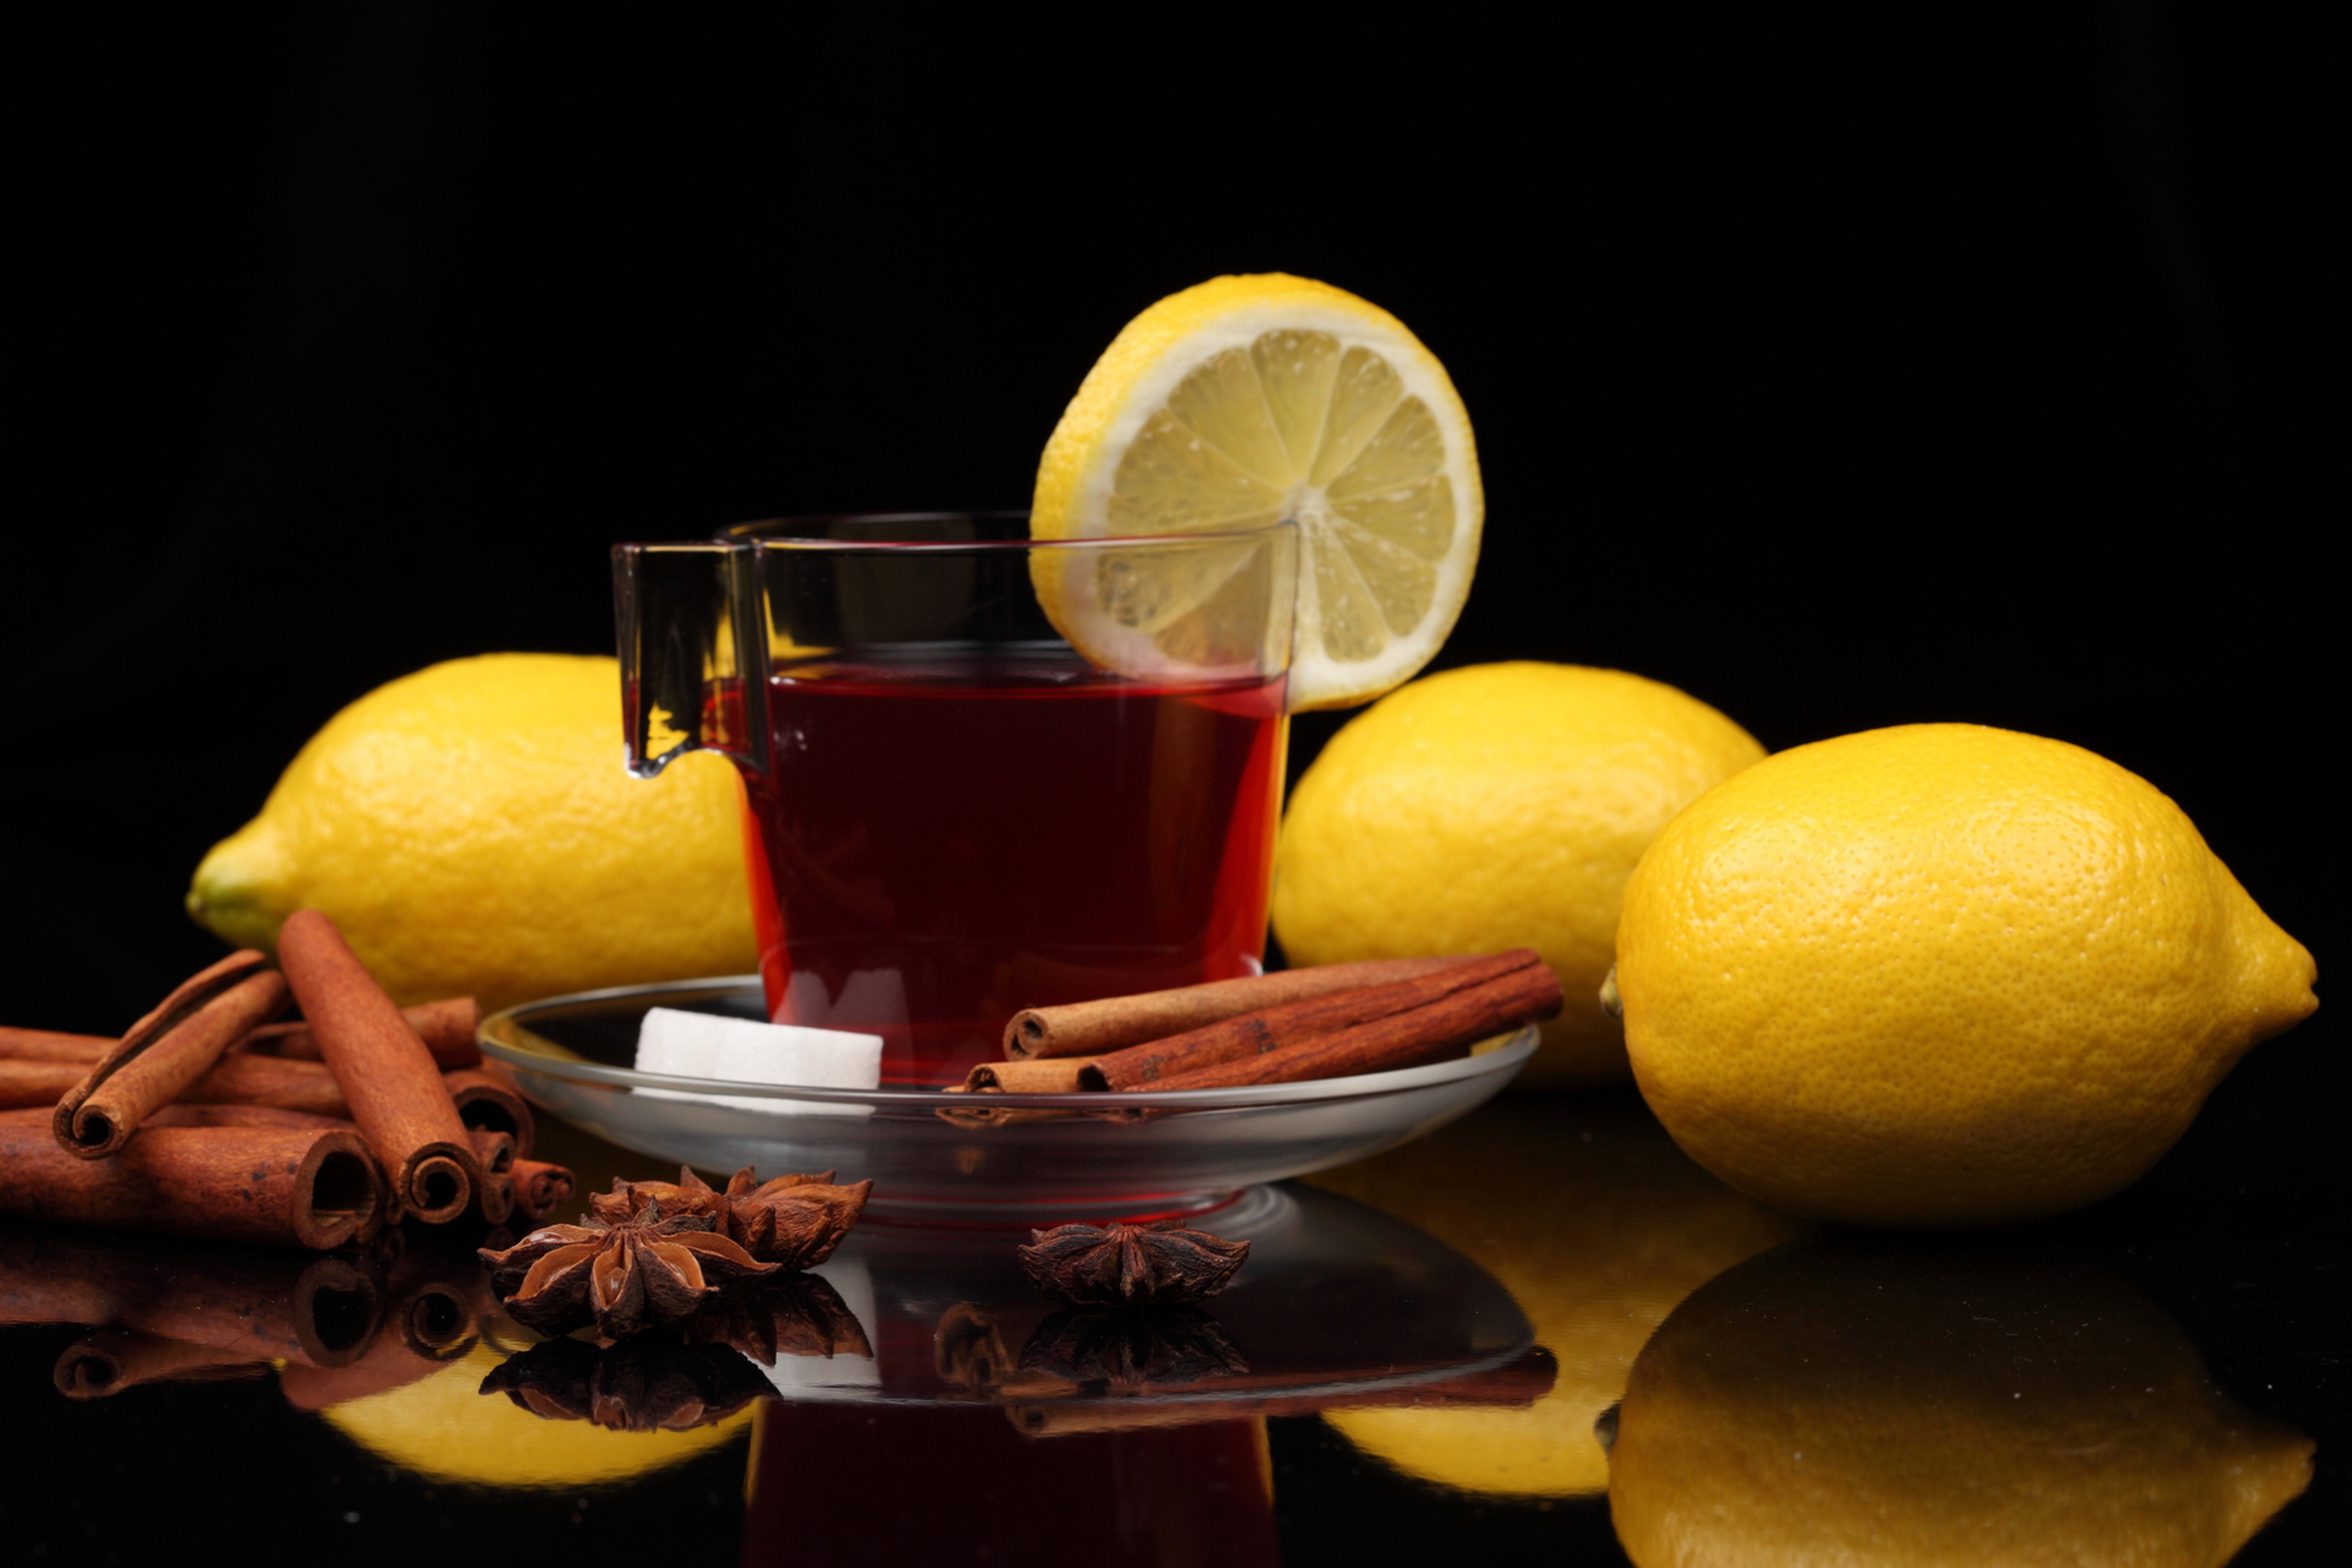 104588 download wallpaper cup, food, cinnamon, lemon, black background, tea, sugar screensavers and pictures for free